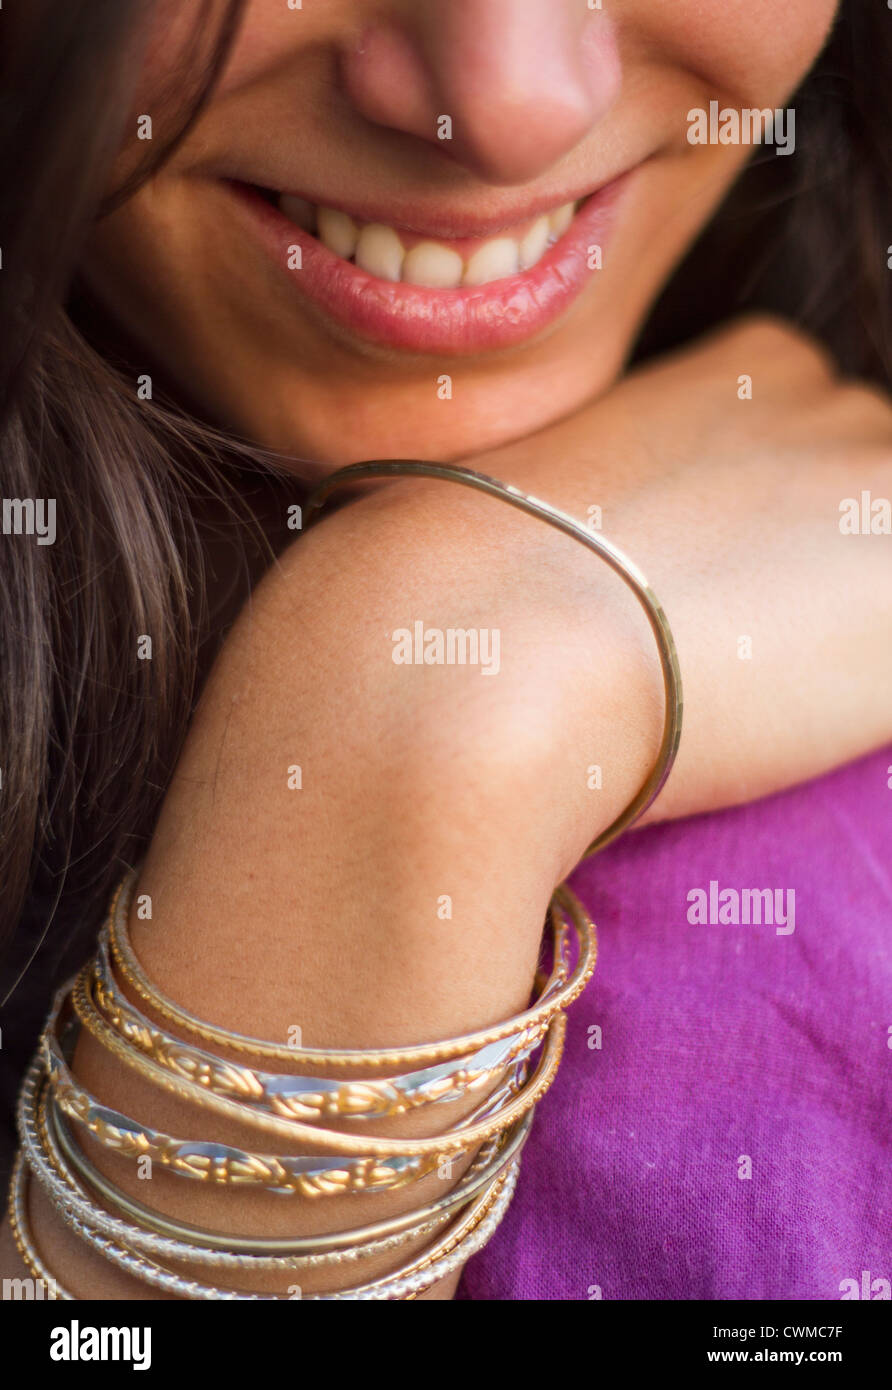 India, Young woman wearing Indian bangles,smiling, close up Stock Photo